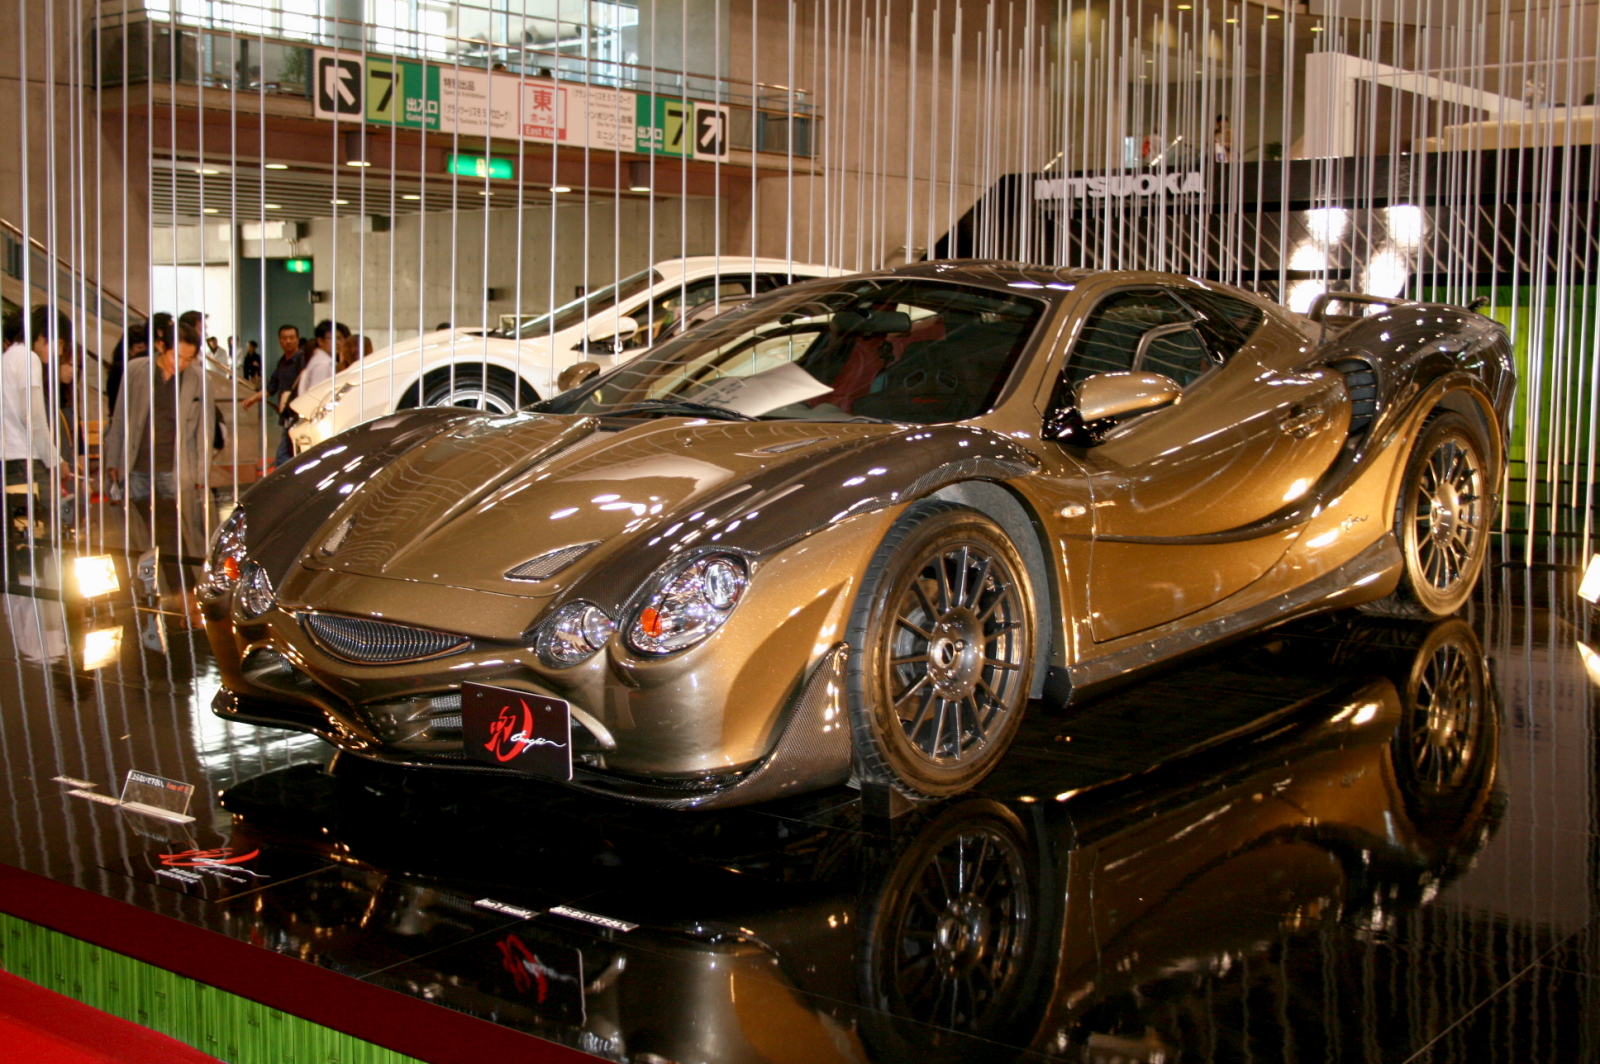 The Ugly Car Blog: Mitsuoka Orochi, dedicated to the ugly cars of ...